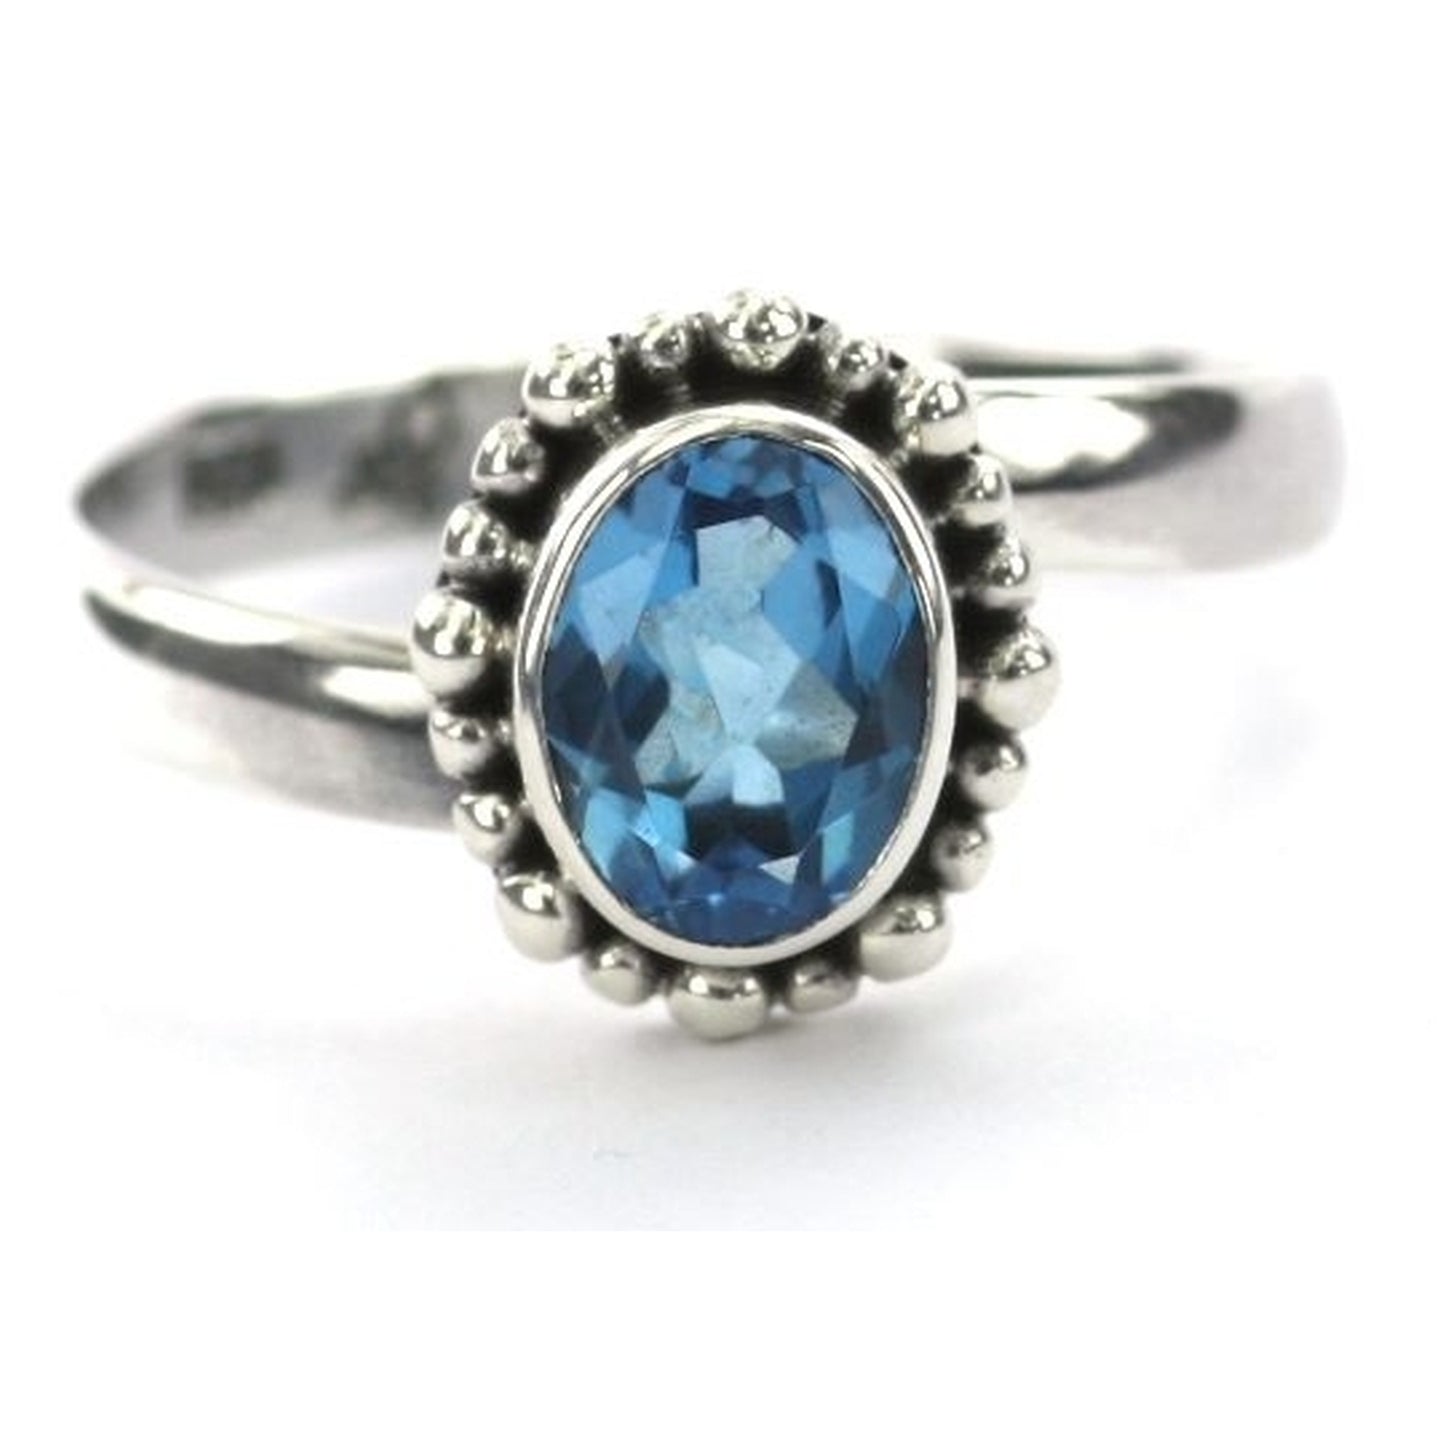 R004BT PADMA .925 Sterling Silver Adjustable Ring with Swiss Blue Topaz